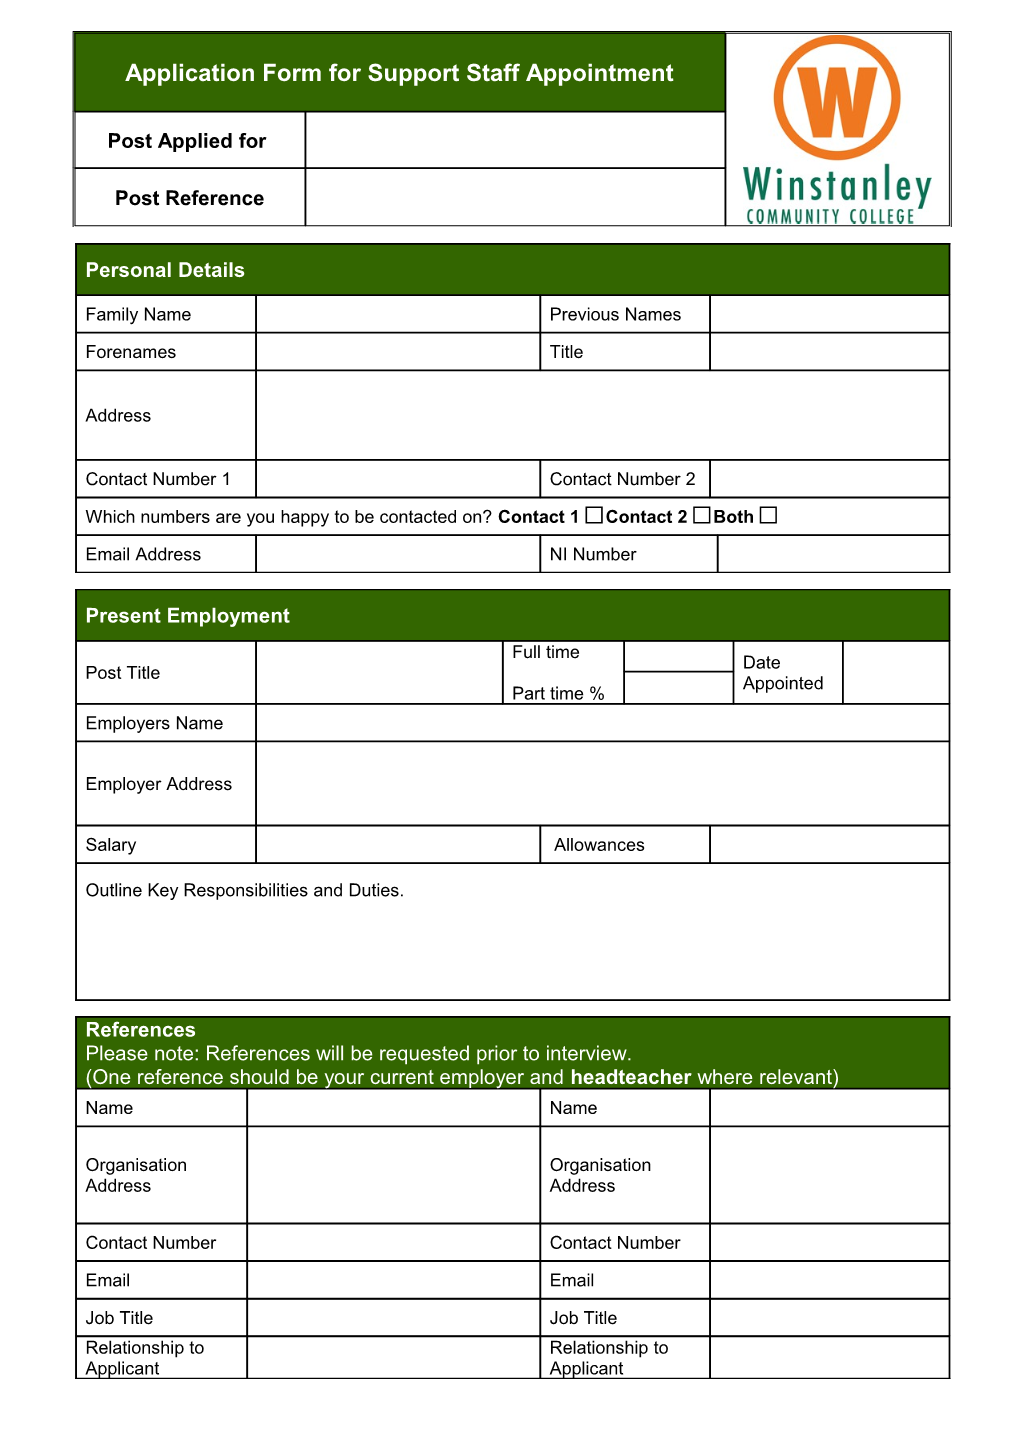 Application Form for Teaching and Head Teacher Appointment